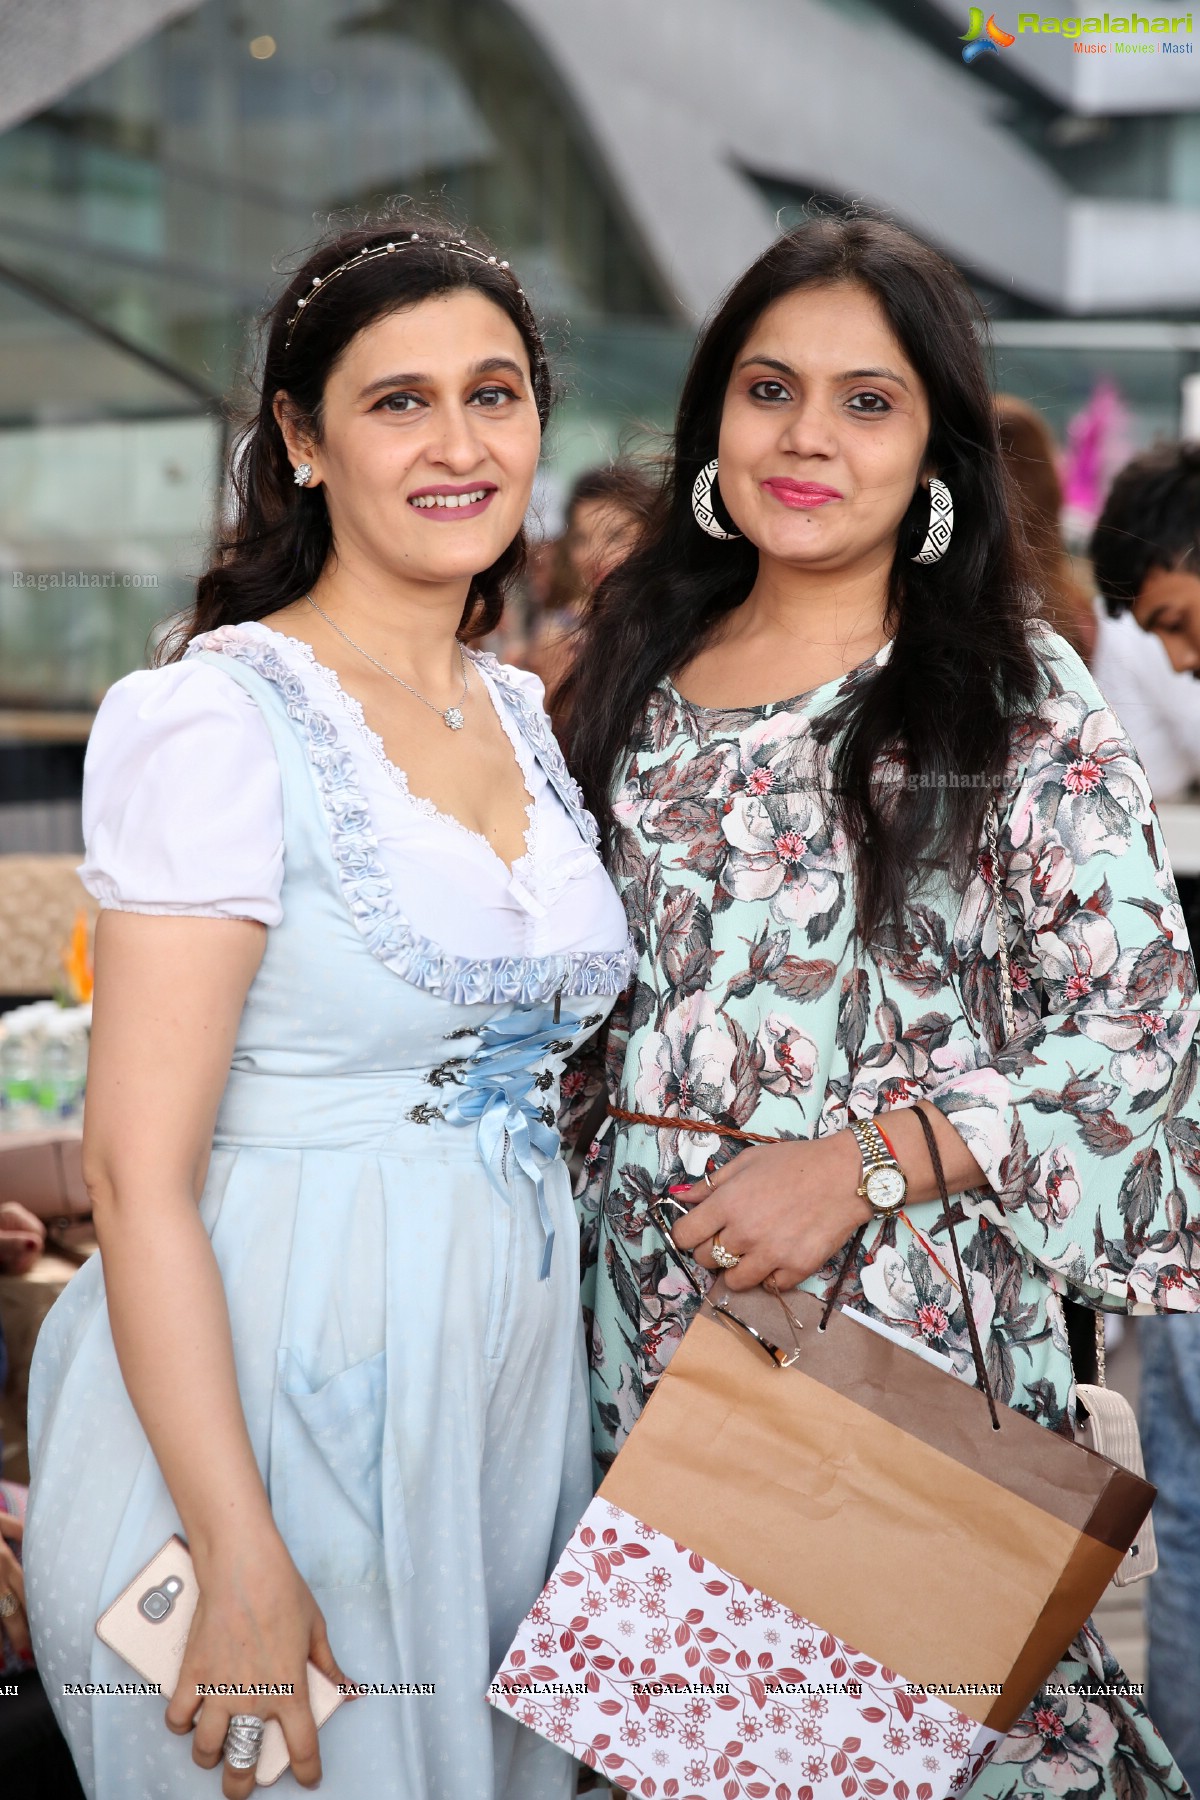 Cake Mixing Event 2018 @ The Park, Hyderabad